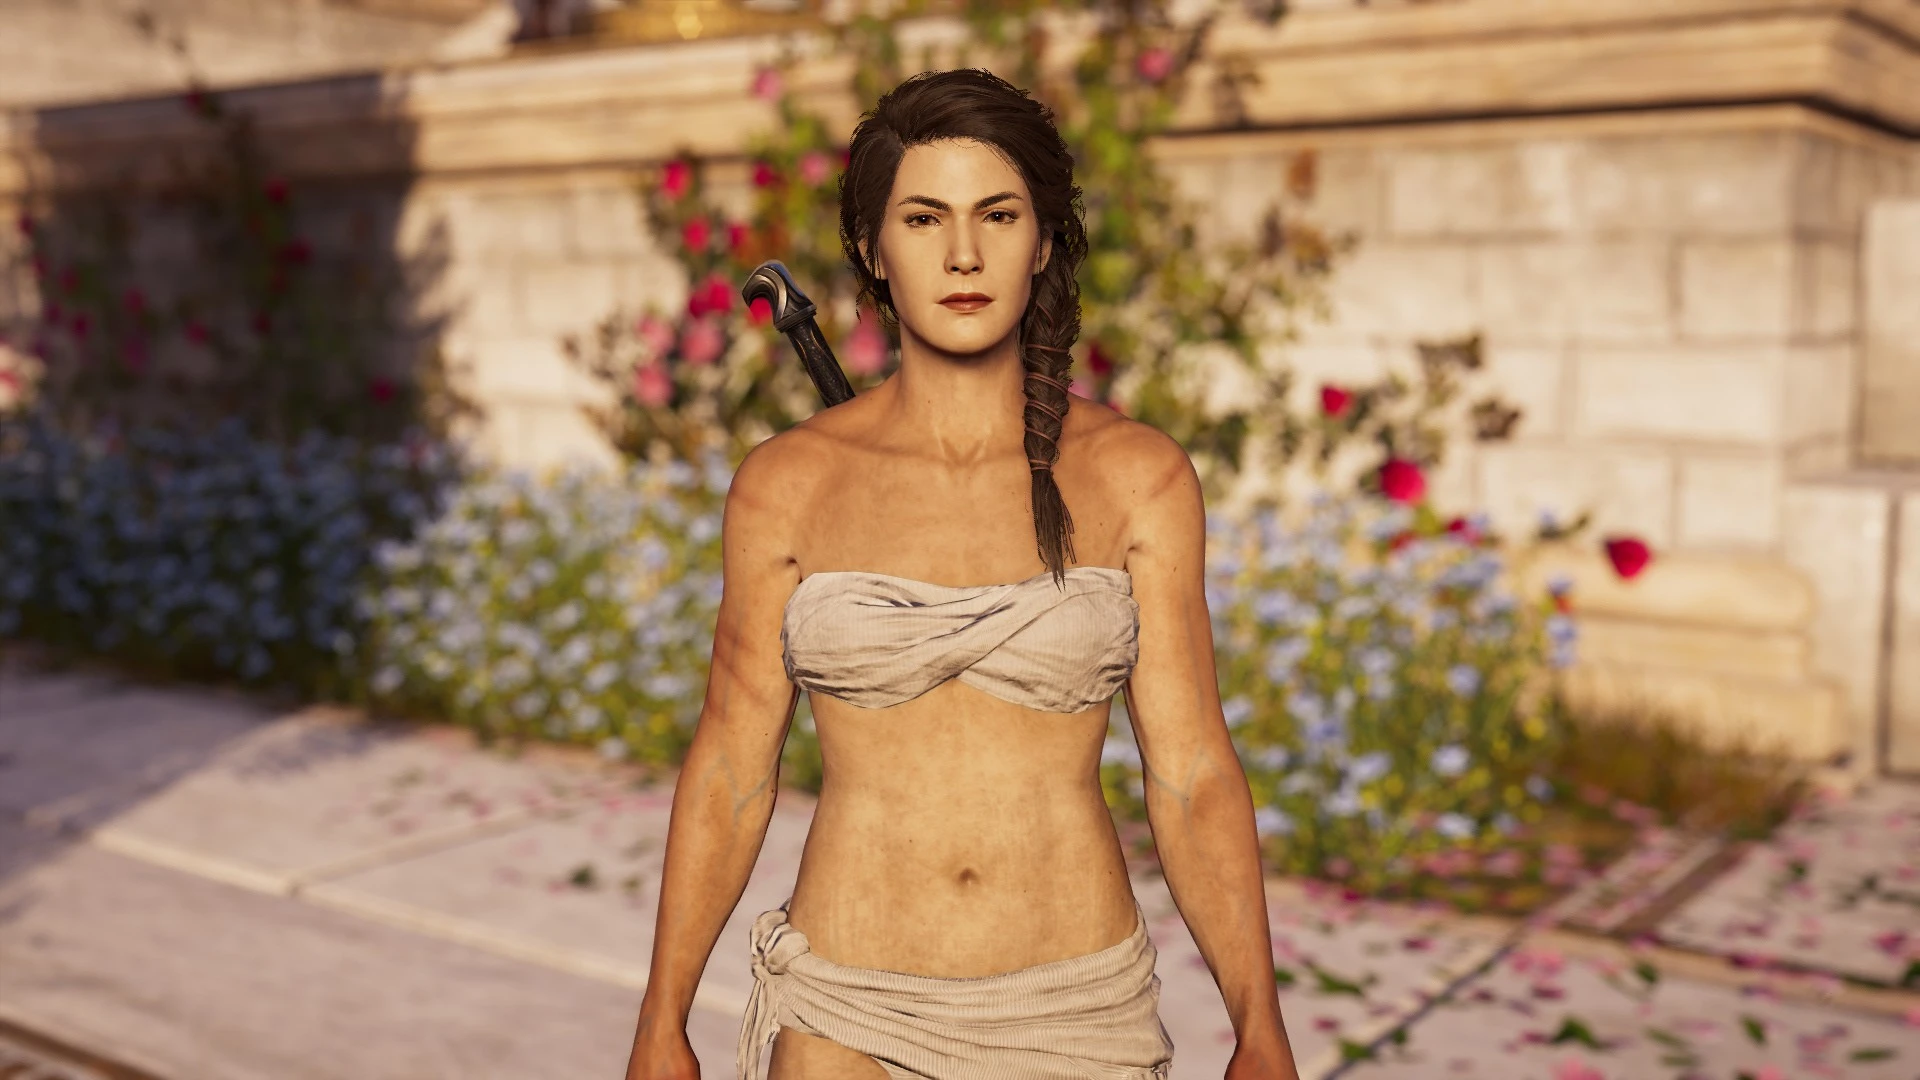 S Creed Odyssey Nexus nude pic, sex photos Different Skin Tones For Kassand...